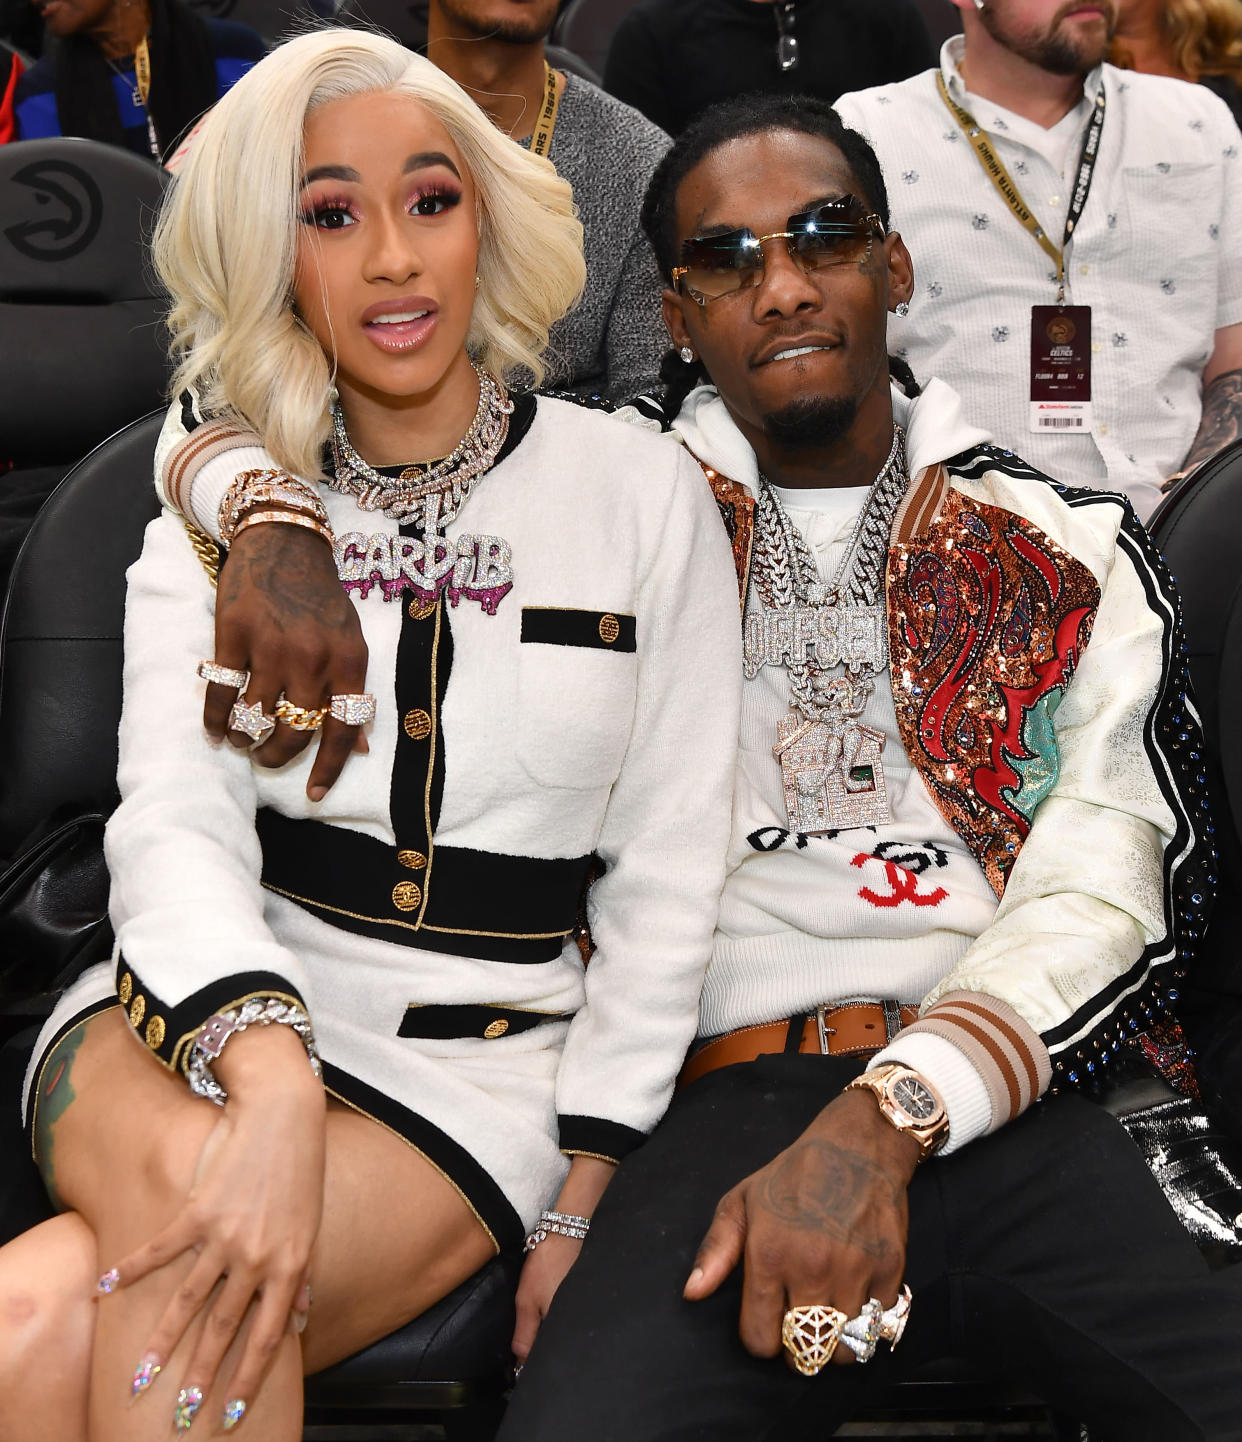 Cardi B and Offset attended a basketball game on Nov. 23. (Photo: Paras Griffin/Getty Images)